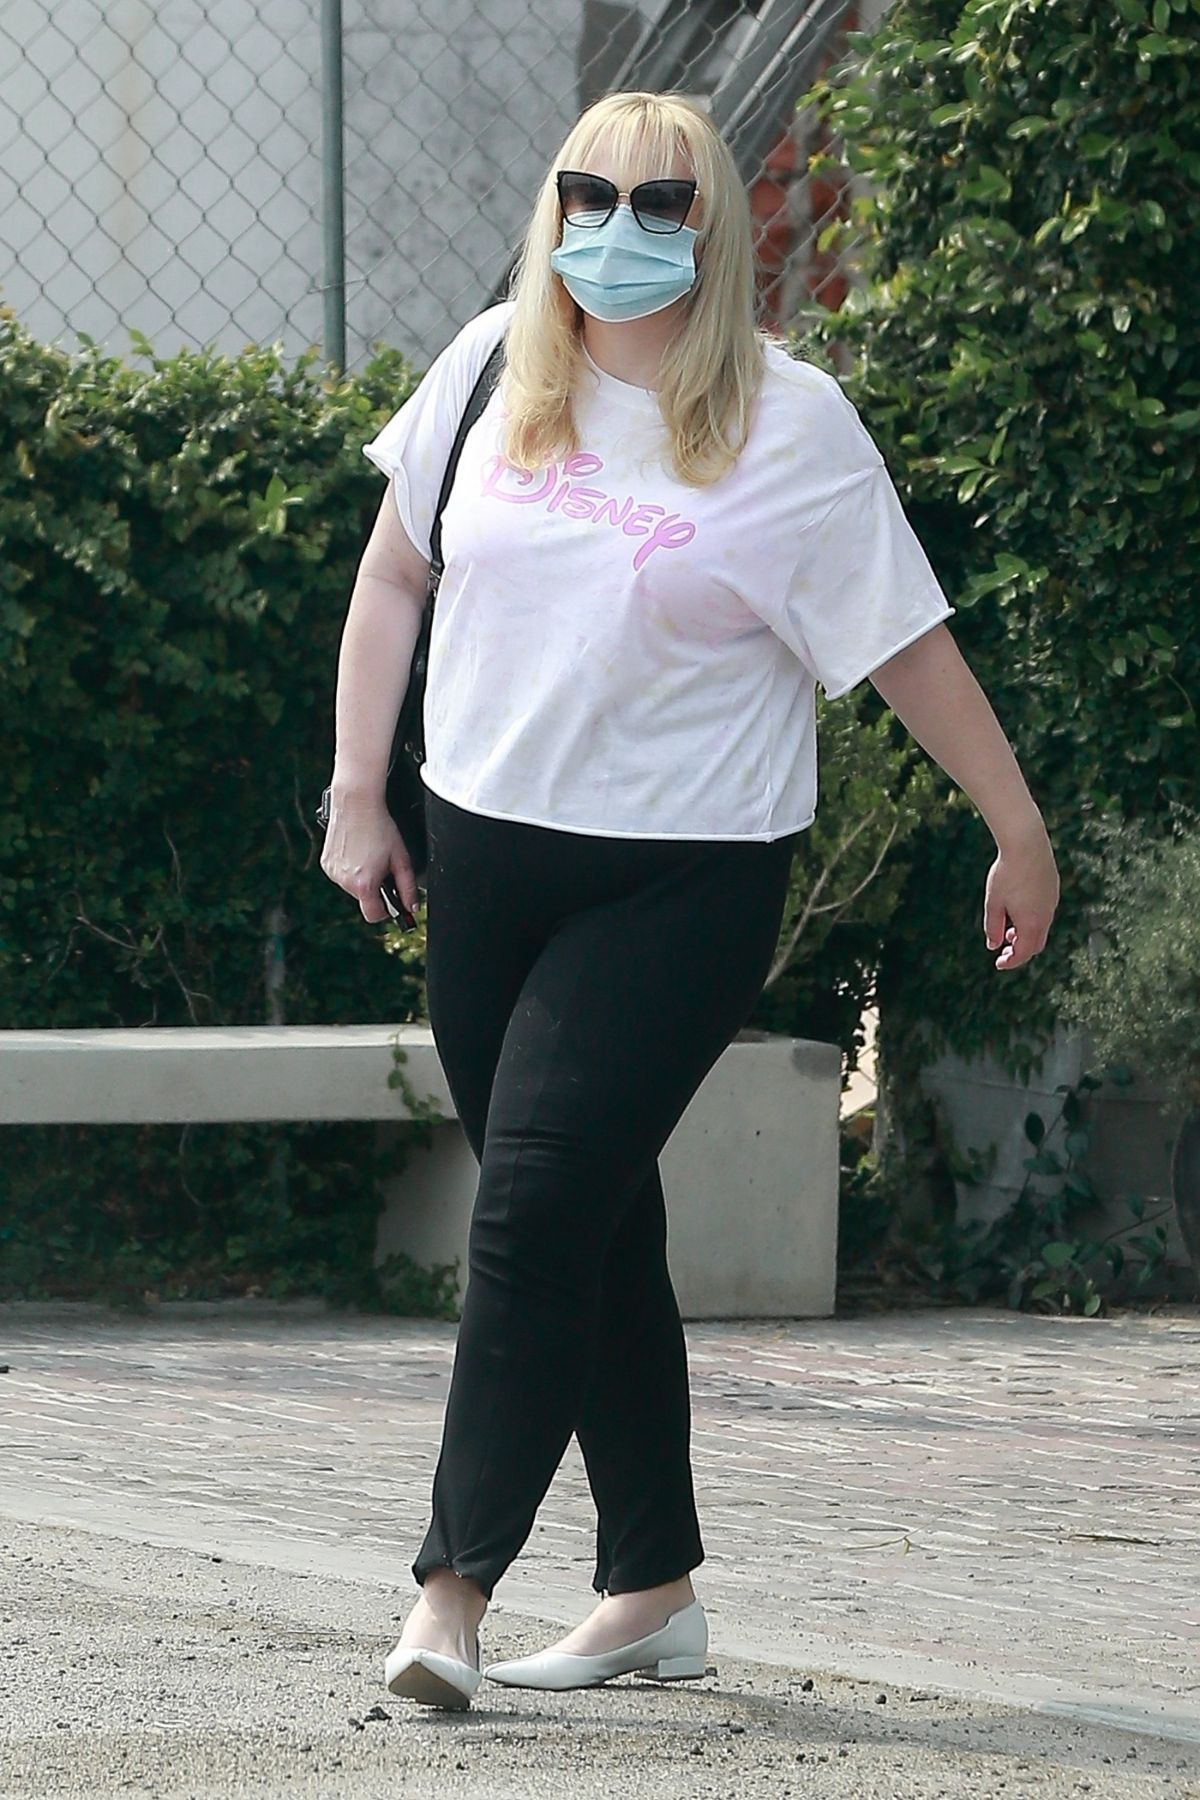 REBEL WILSON Wearing a Mask Out in West Hollywood 08/21 ...